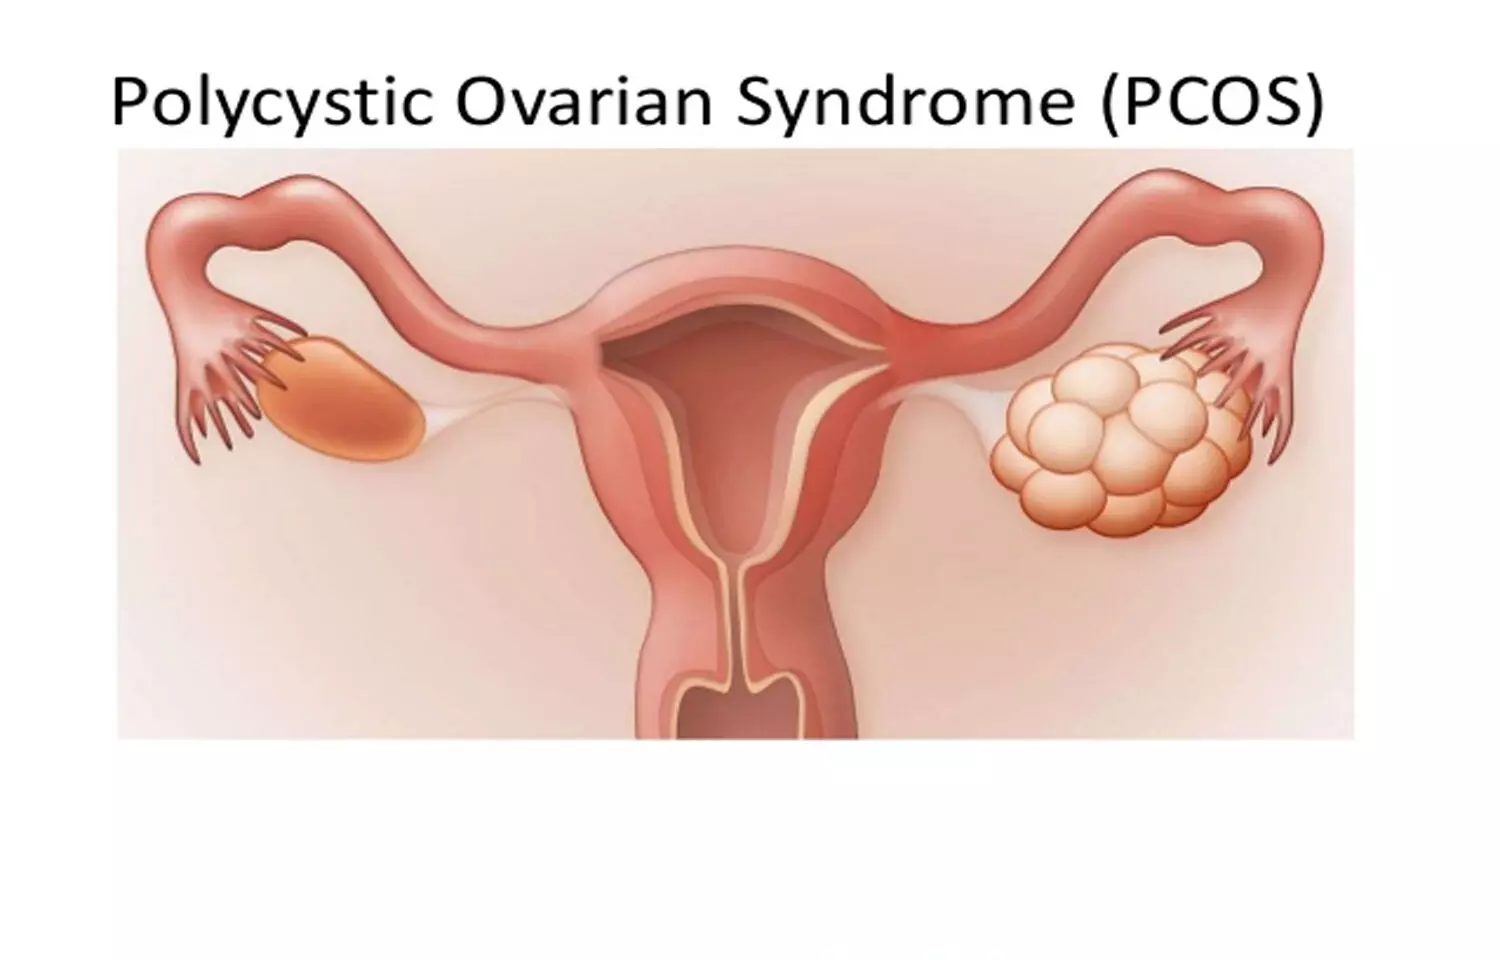 PCOS tied to increased risk of neuropsychiatric disorders in offspring, finds study